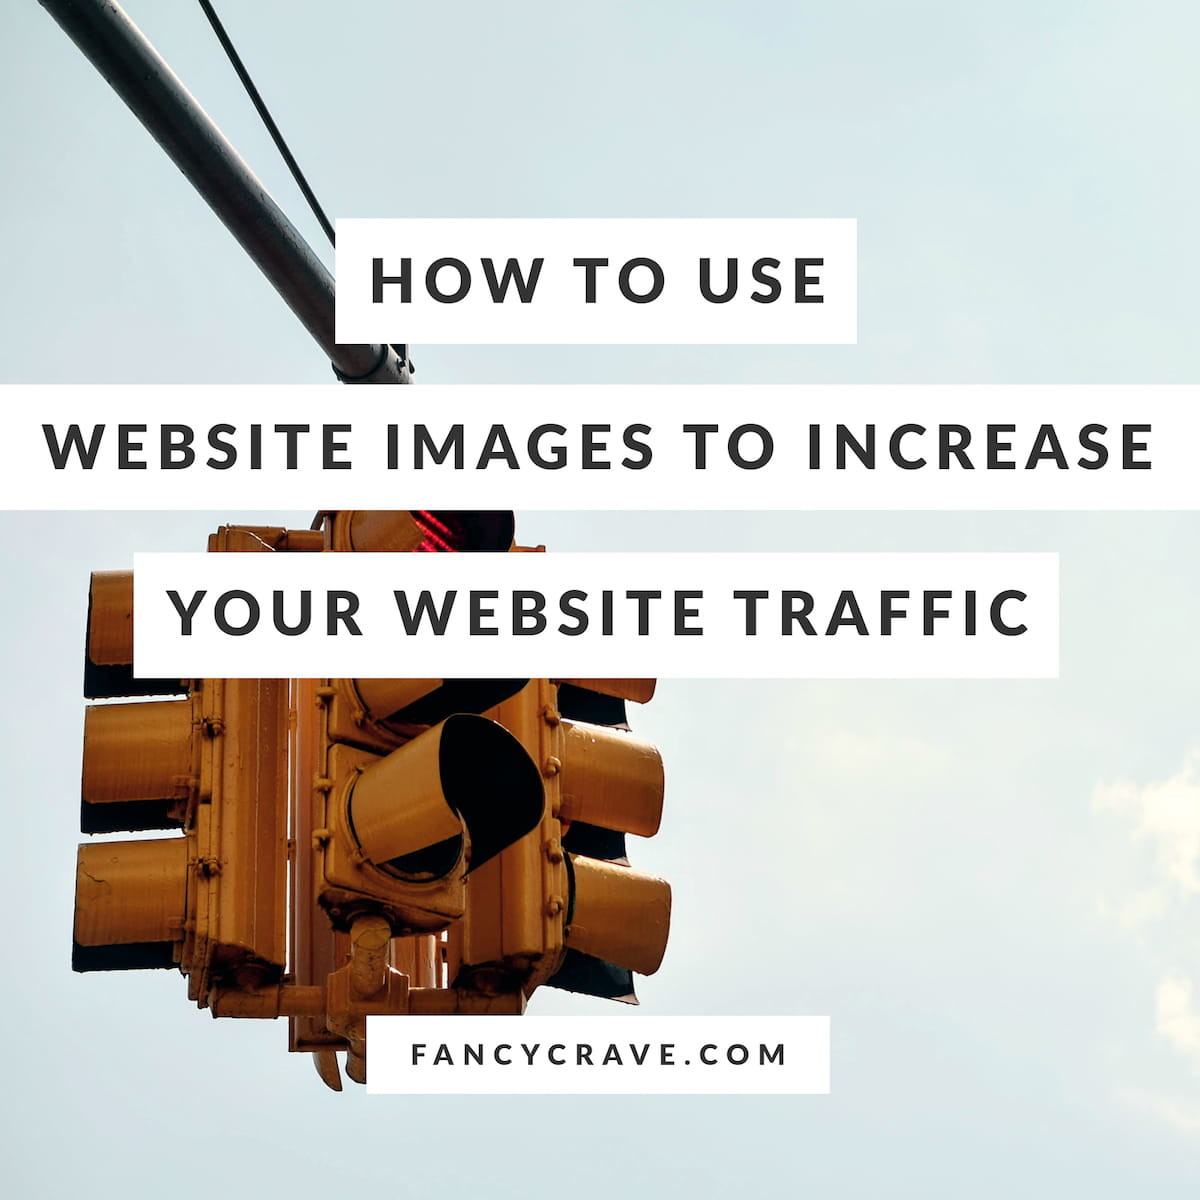 How to Use Website Images to Increase Your Website Traffic